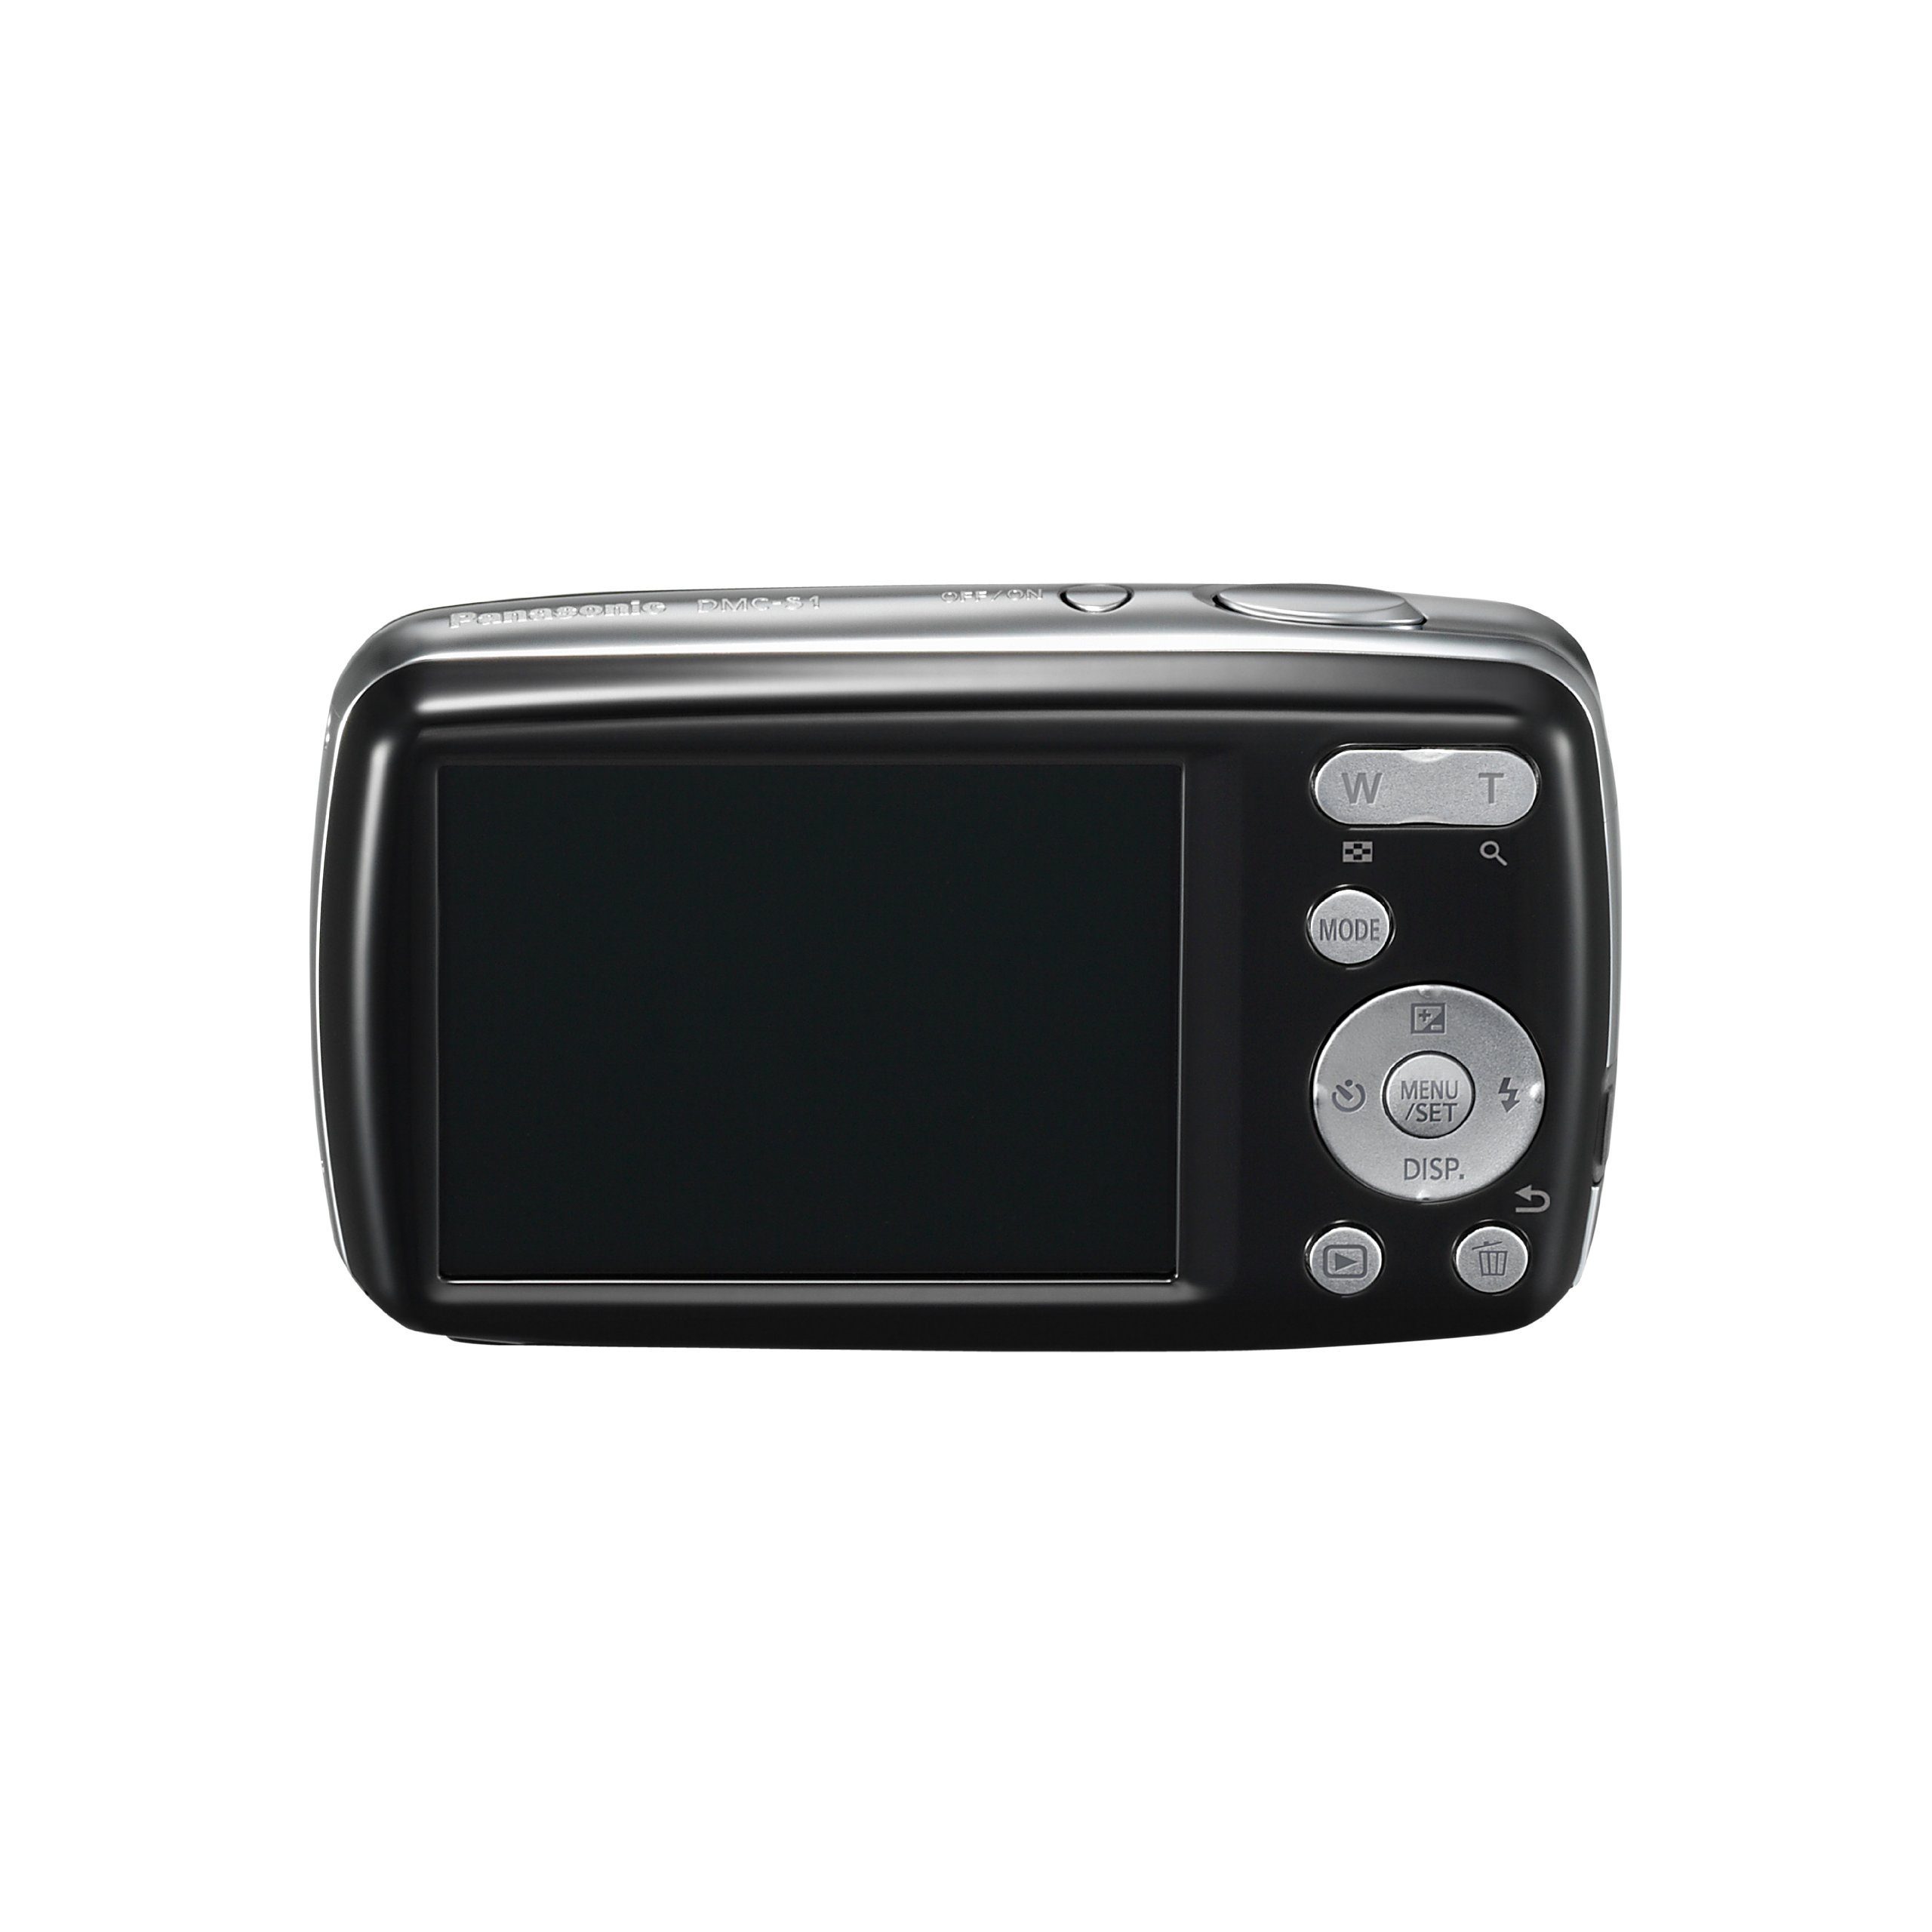 Panasonic Lumix DMC-S1 12.1 MP Digital Camera with 4x Optical Image Stabilized Zoom with 2.7-Inch LCD (Black)